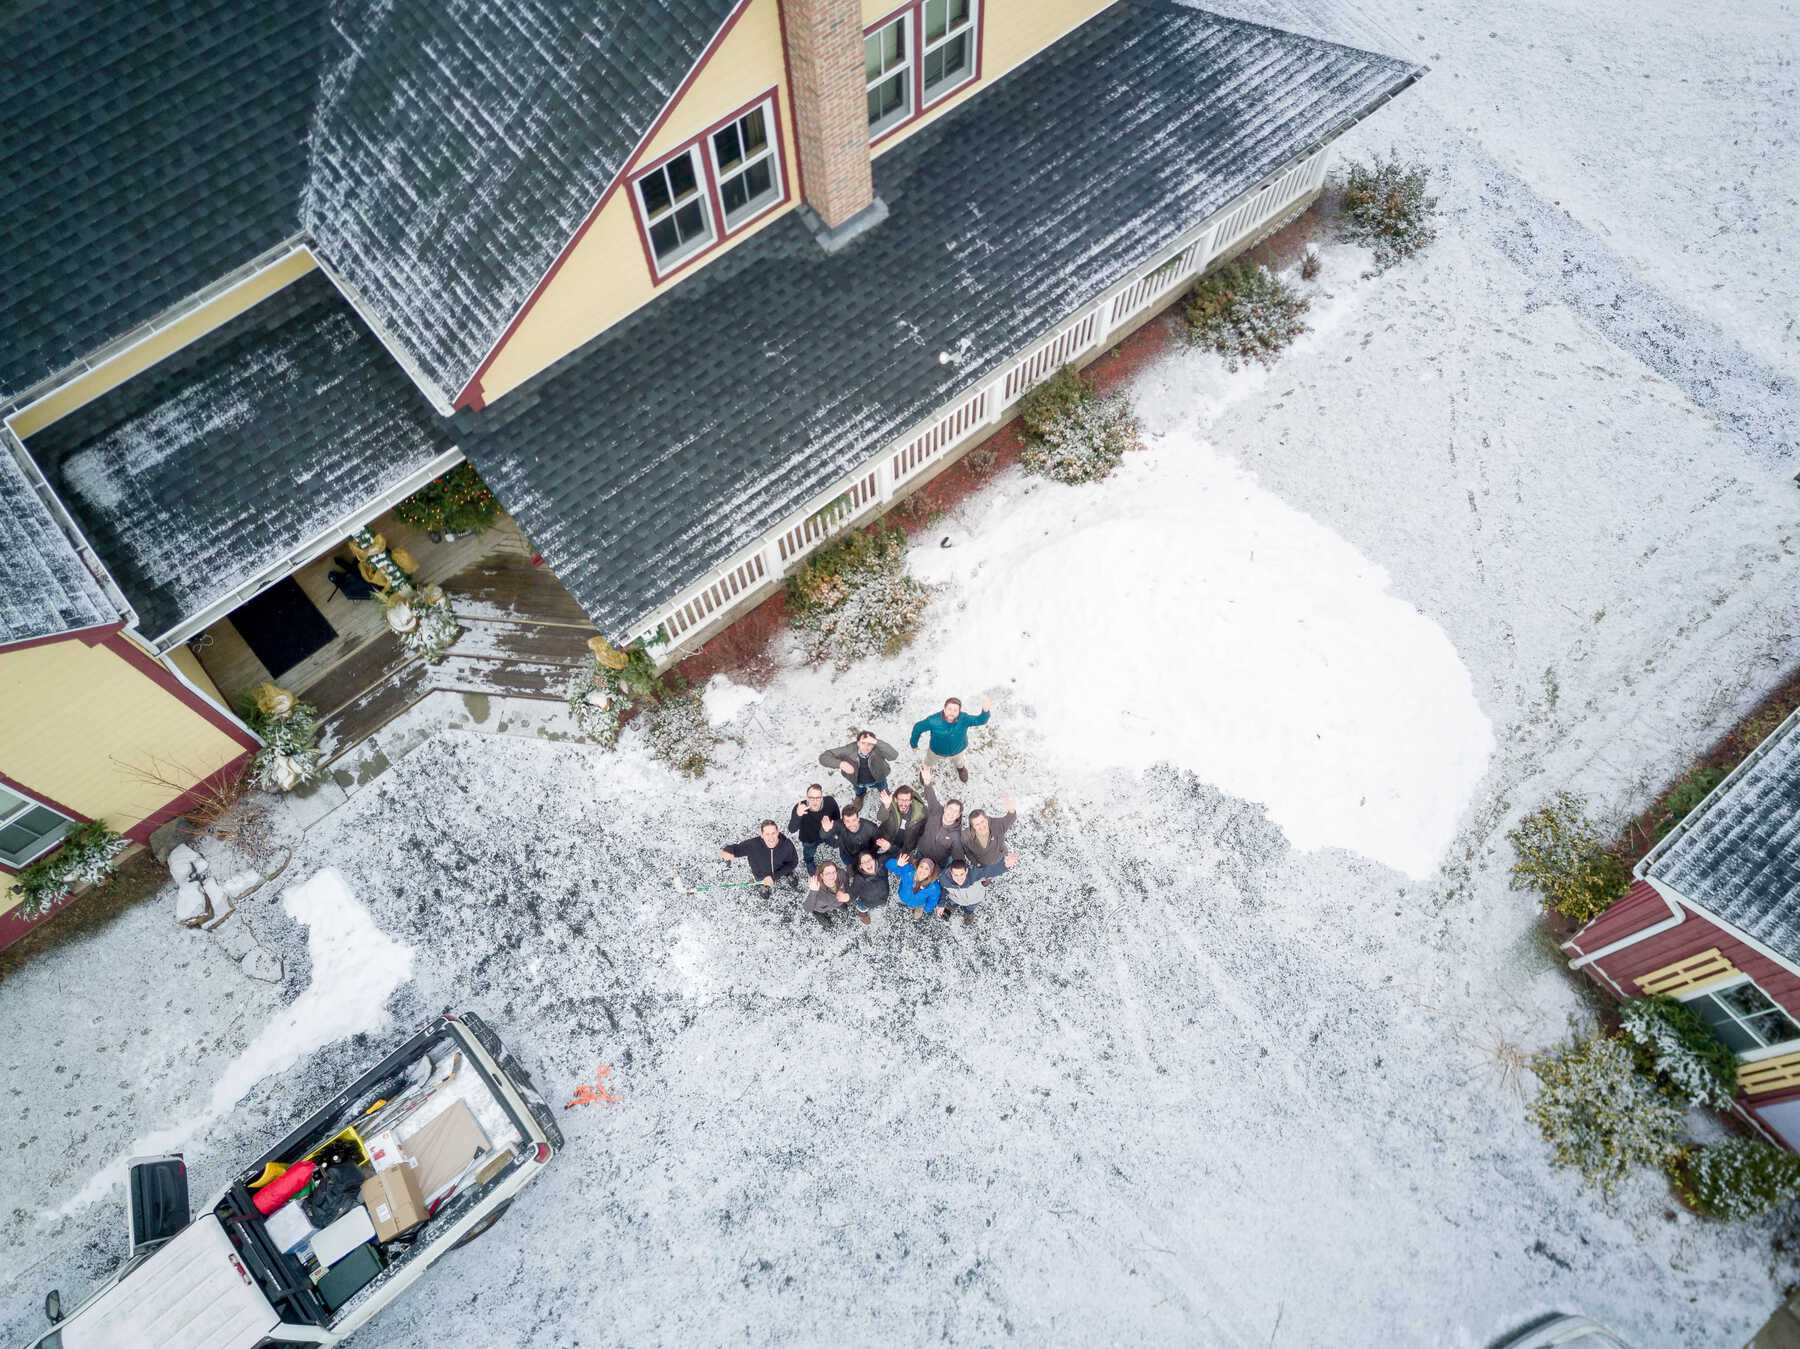 Group in snow looking up to drone taking photo